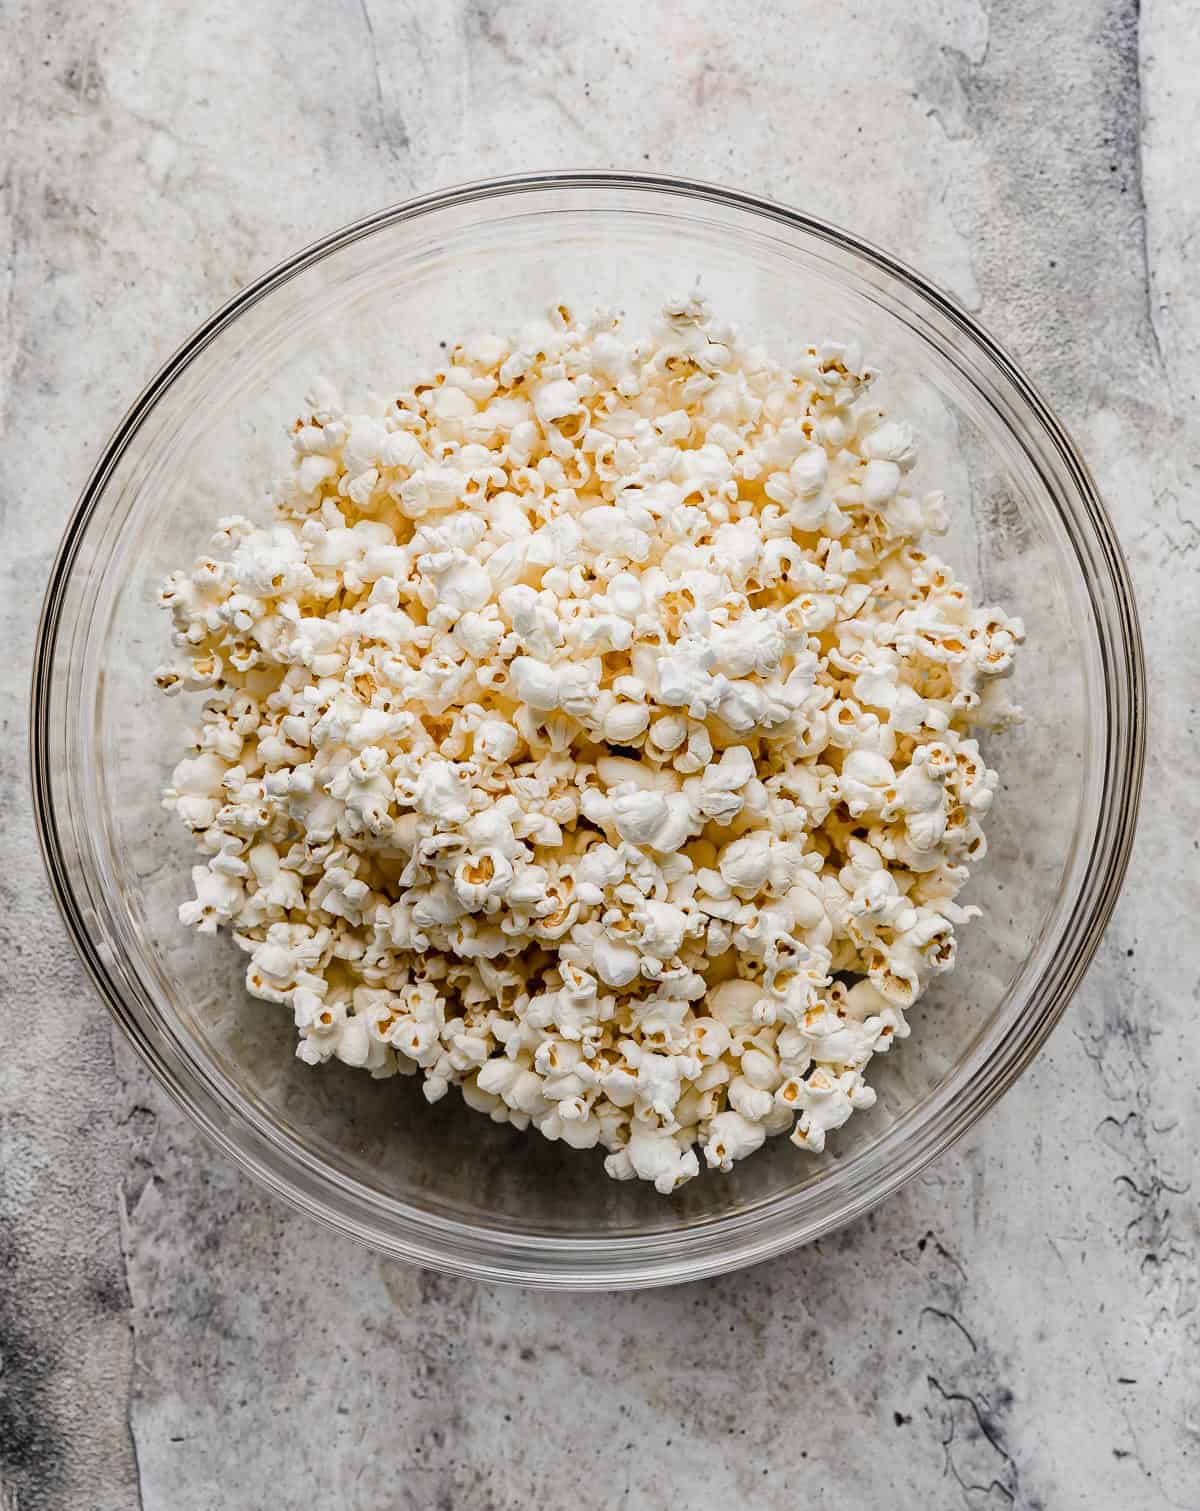 Popped popcorn in a glass bowl on a gray background.